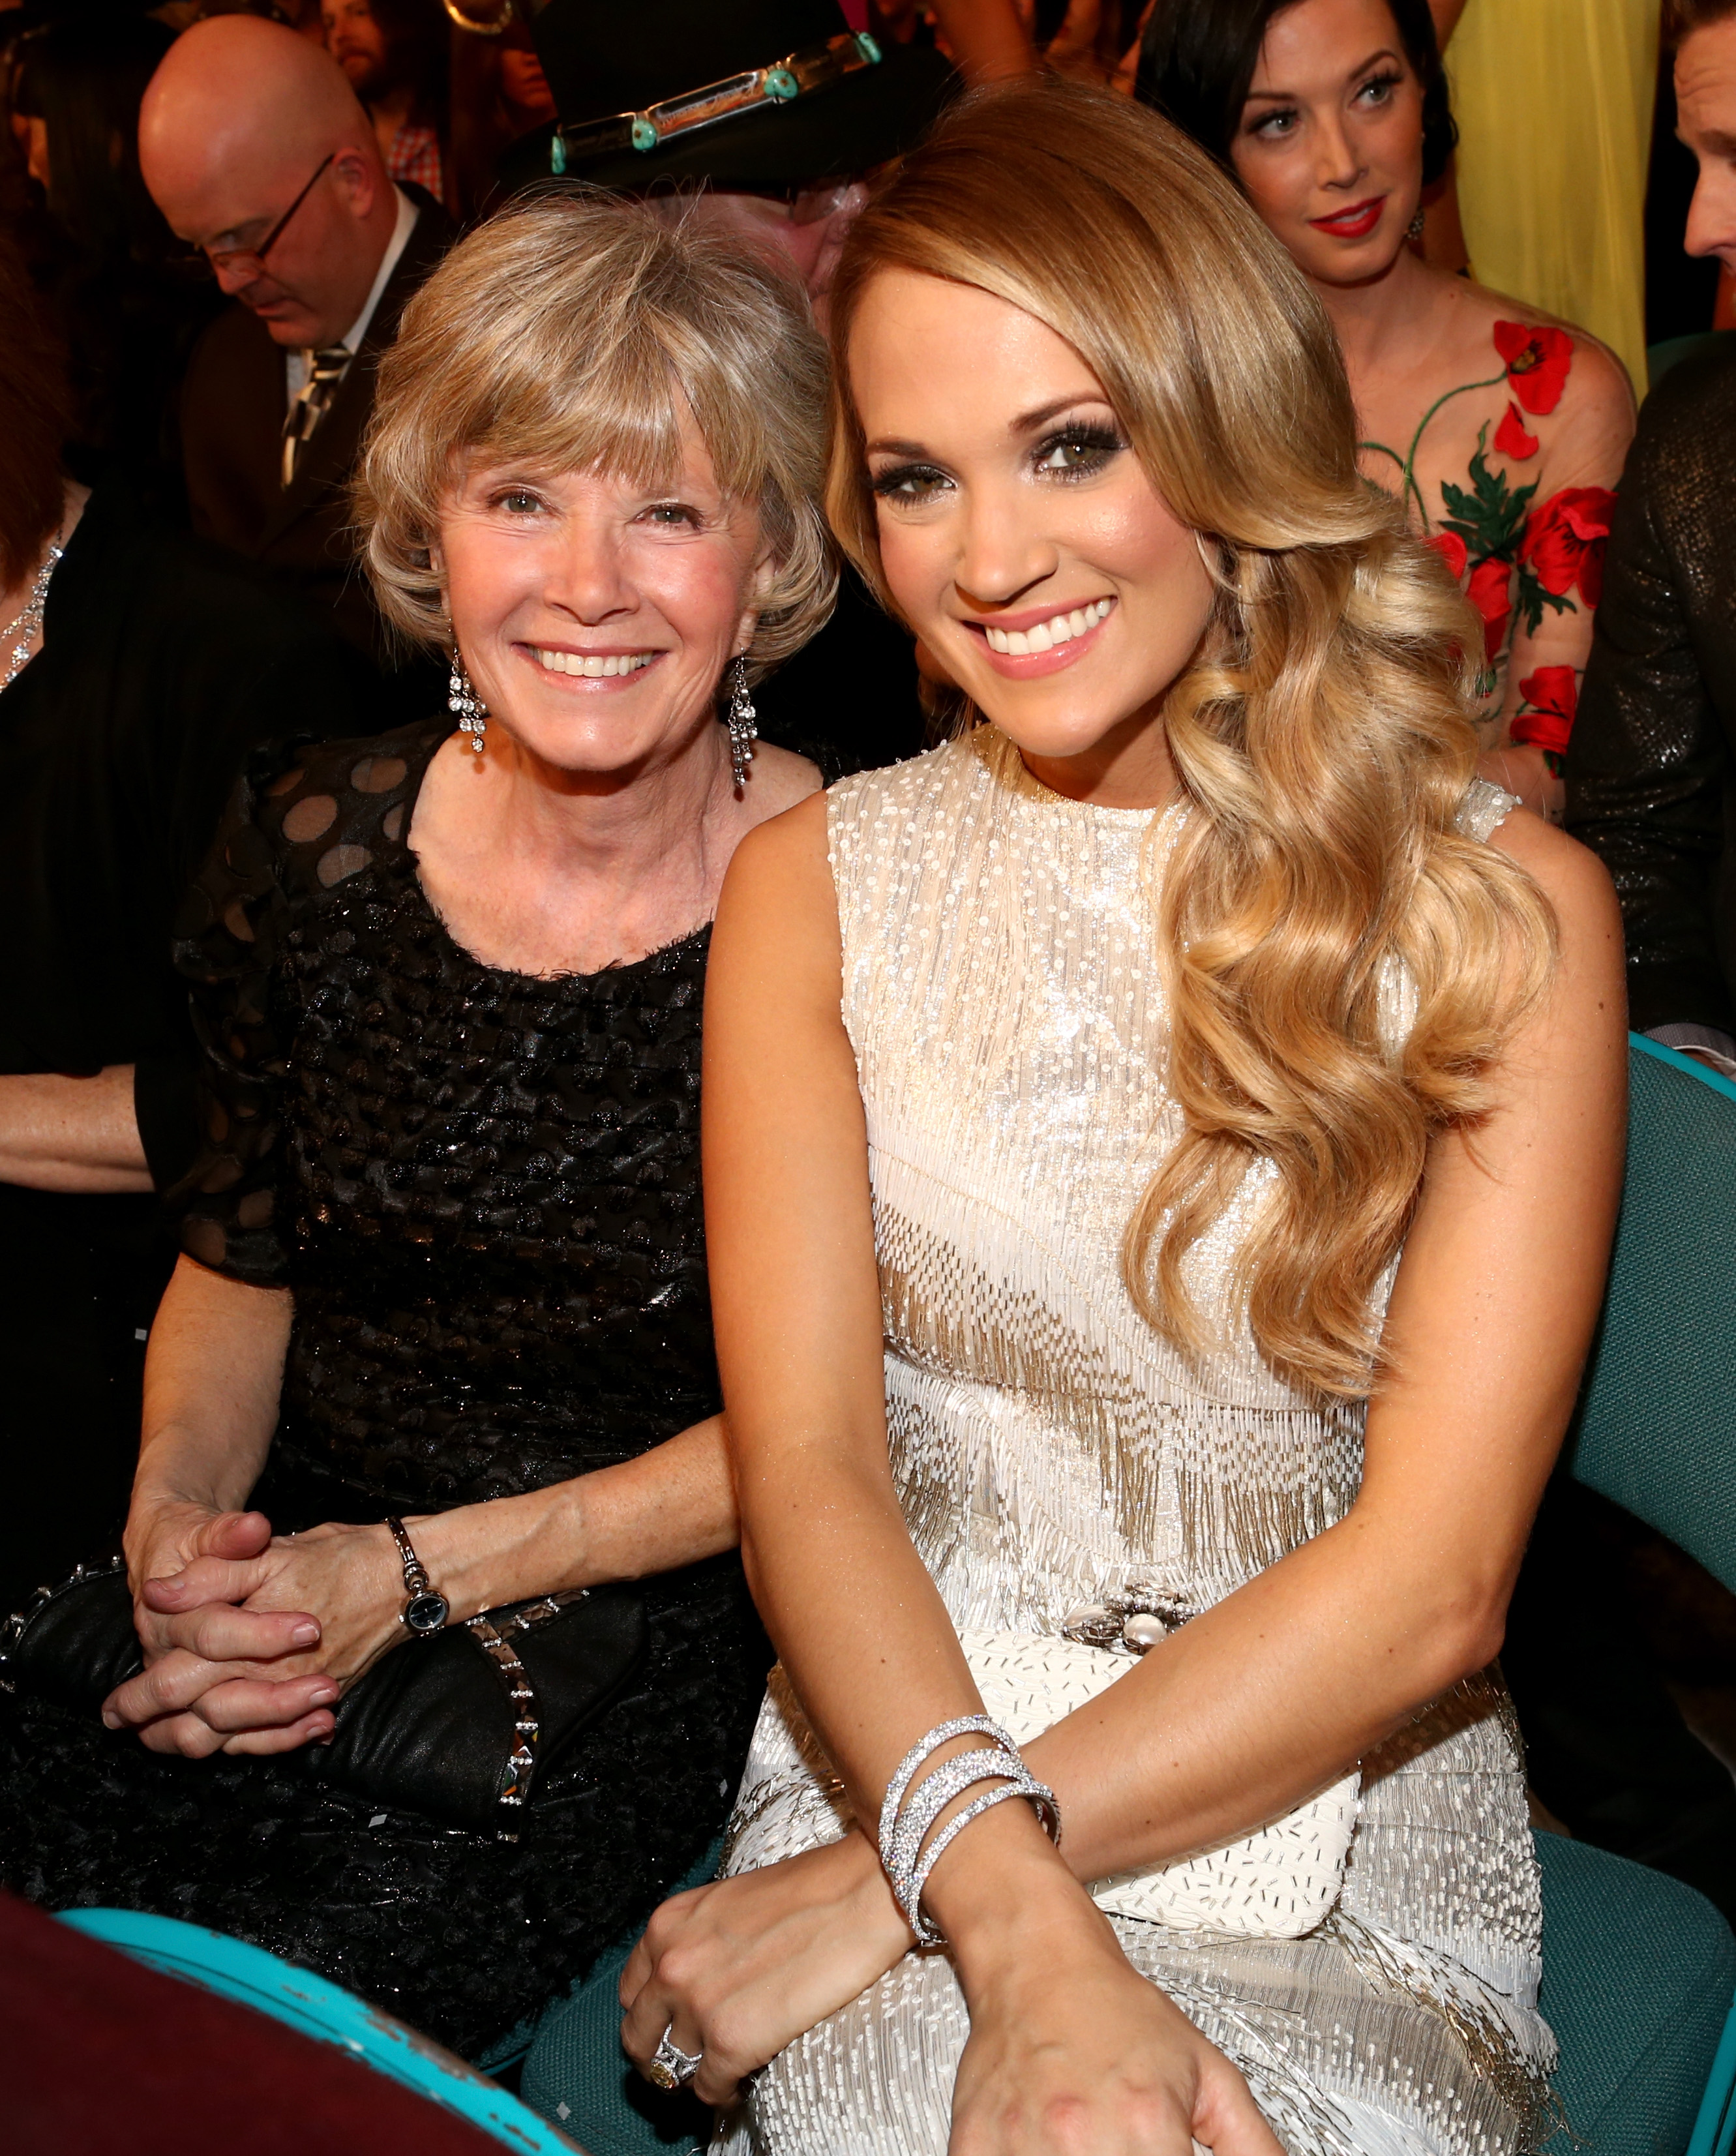 Carole Underwood and Carrie Underwood at the 49th Annual Academy of Country Music Awards on April 6, 2014, in Las Vegas, Nevada. | Source: Getty Images